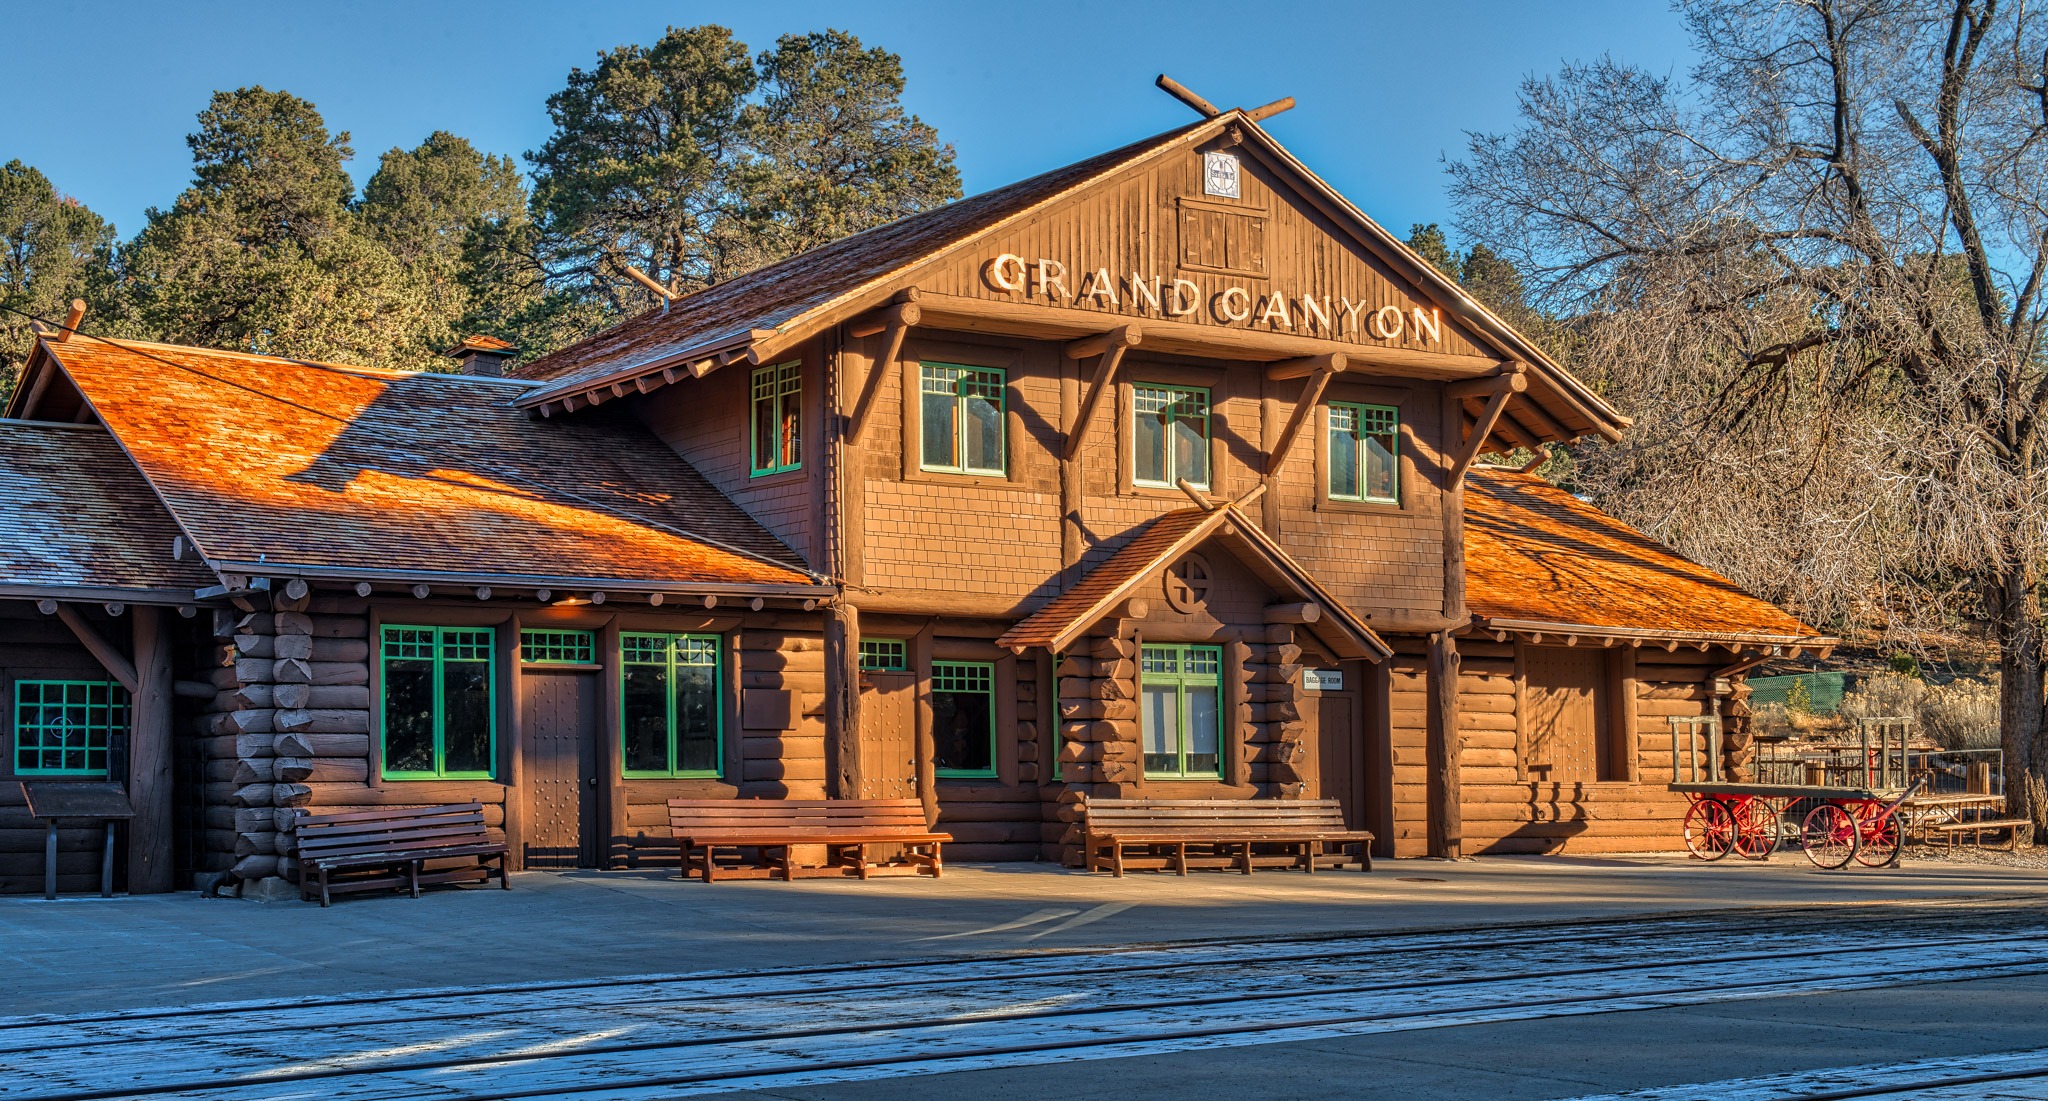 An early morning view of the front of the train station located in Grand Canyon Village on the South Rim of the Grand Canyon in Arizona.